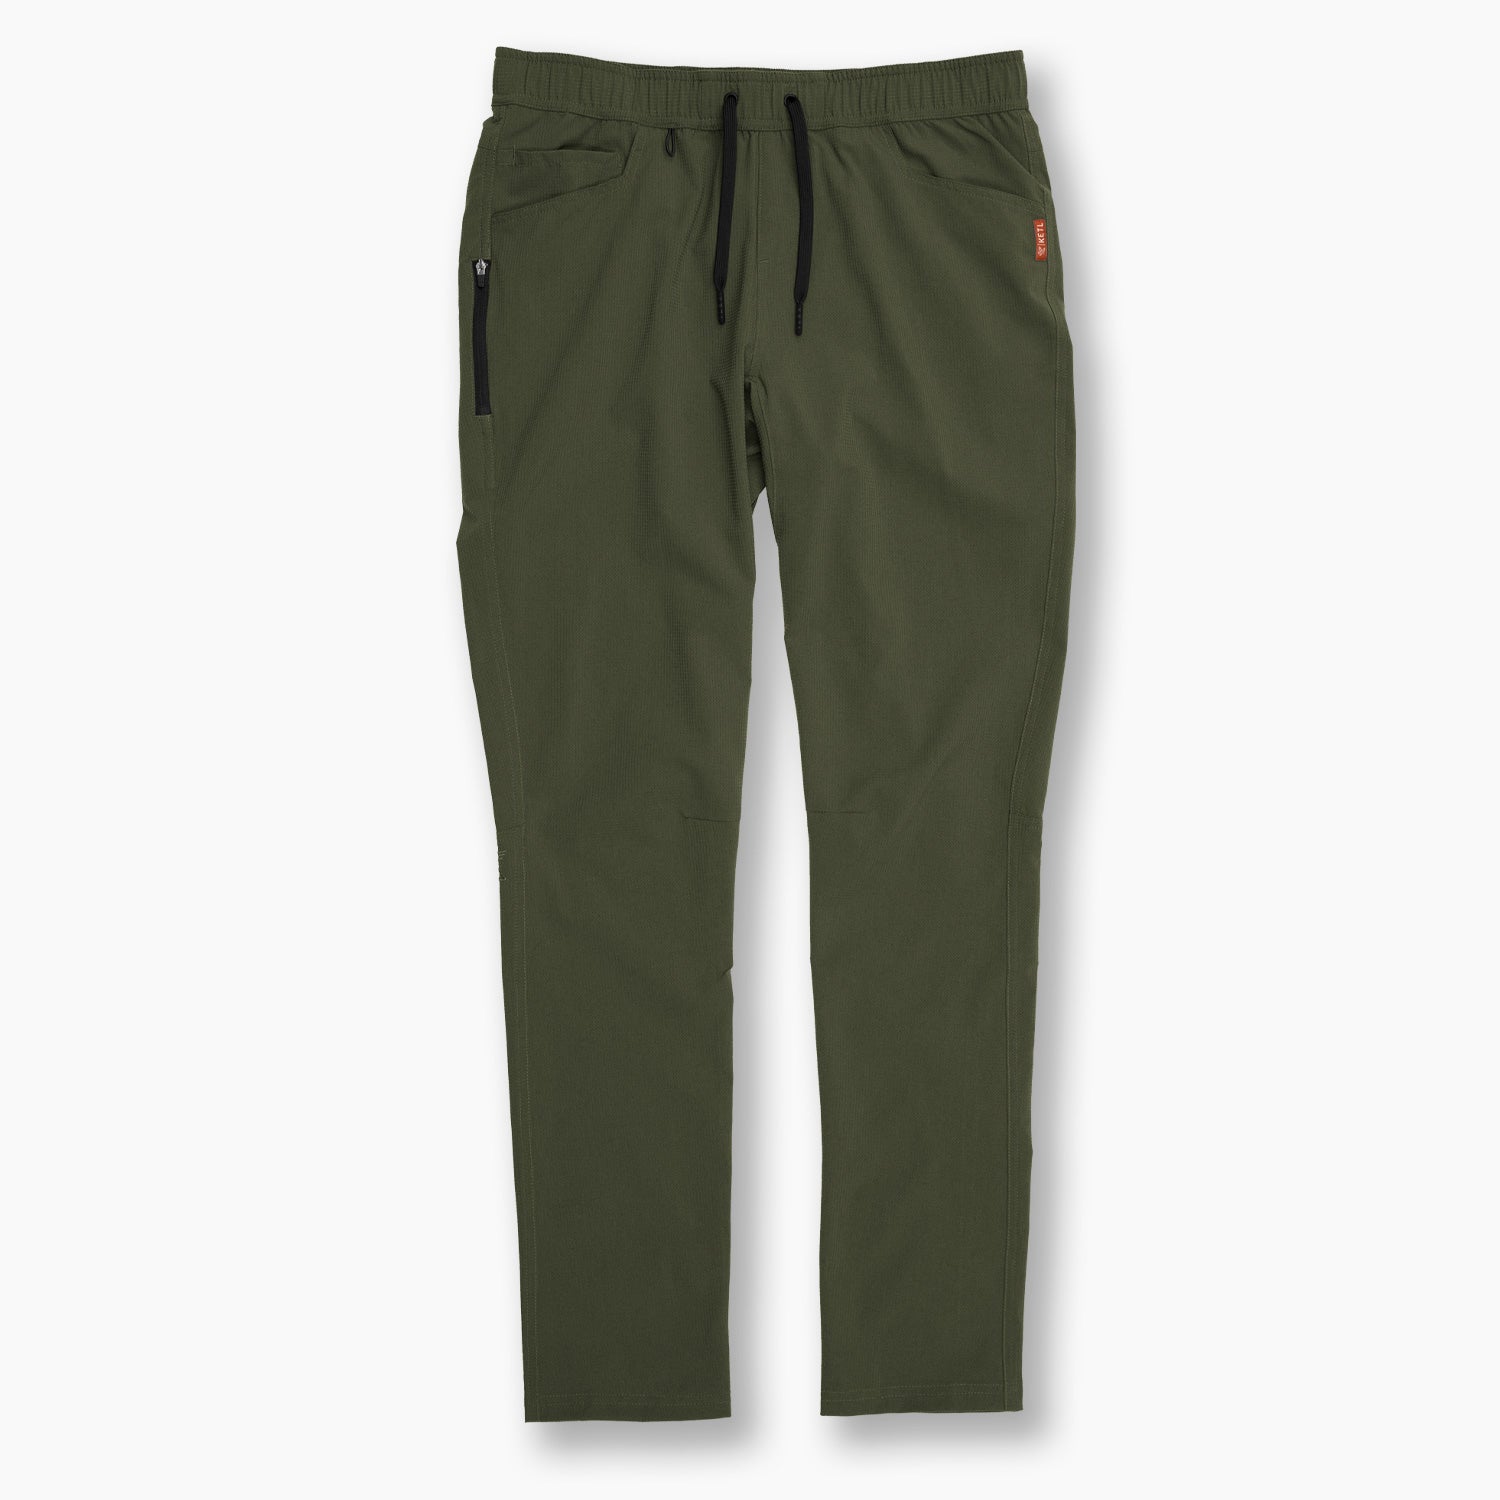 Joggers Pants For Ladies  Escapade Nigeria Online Shopping Mall